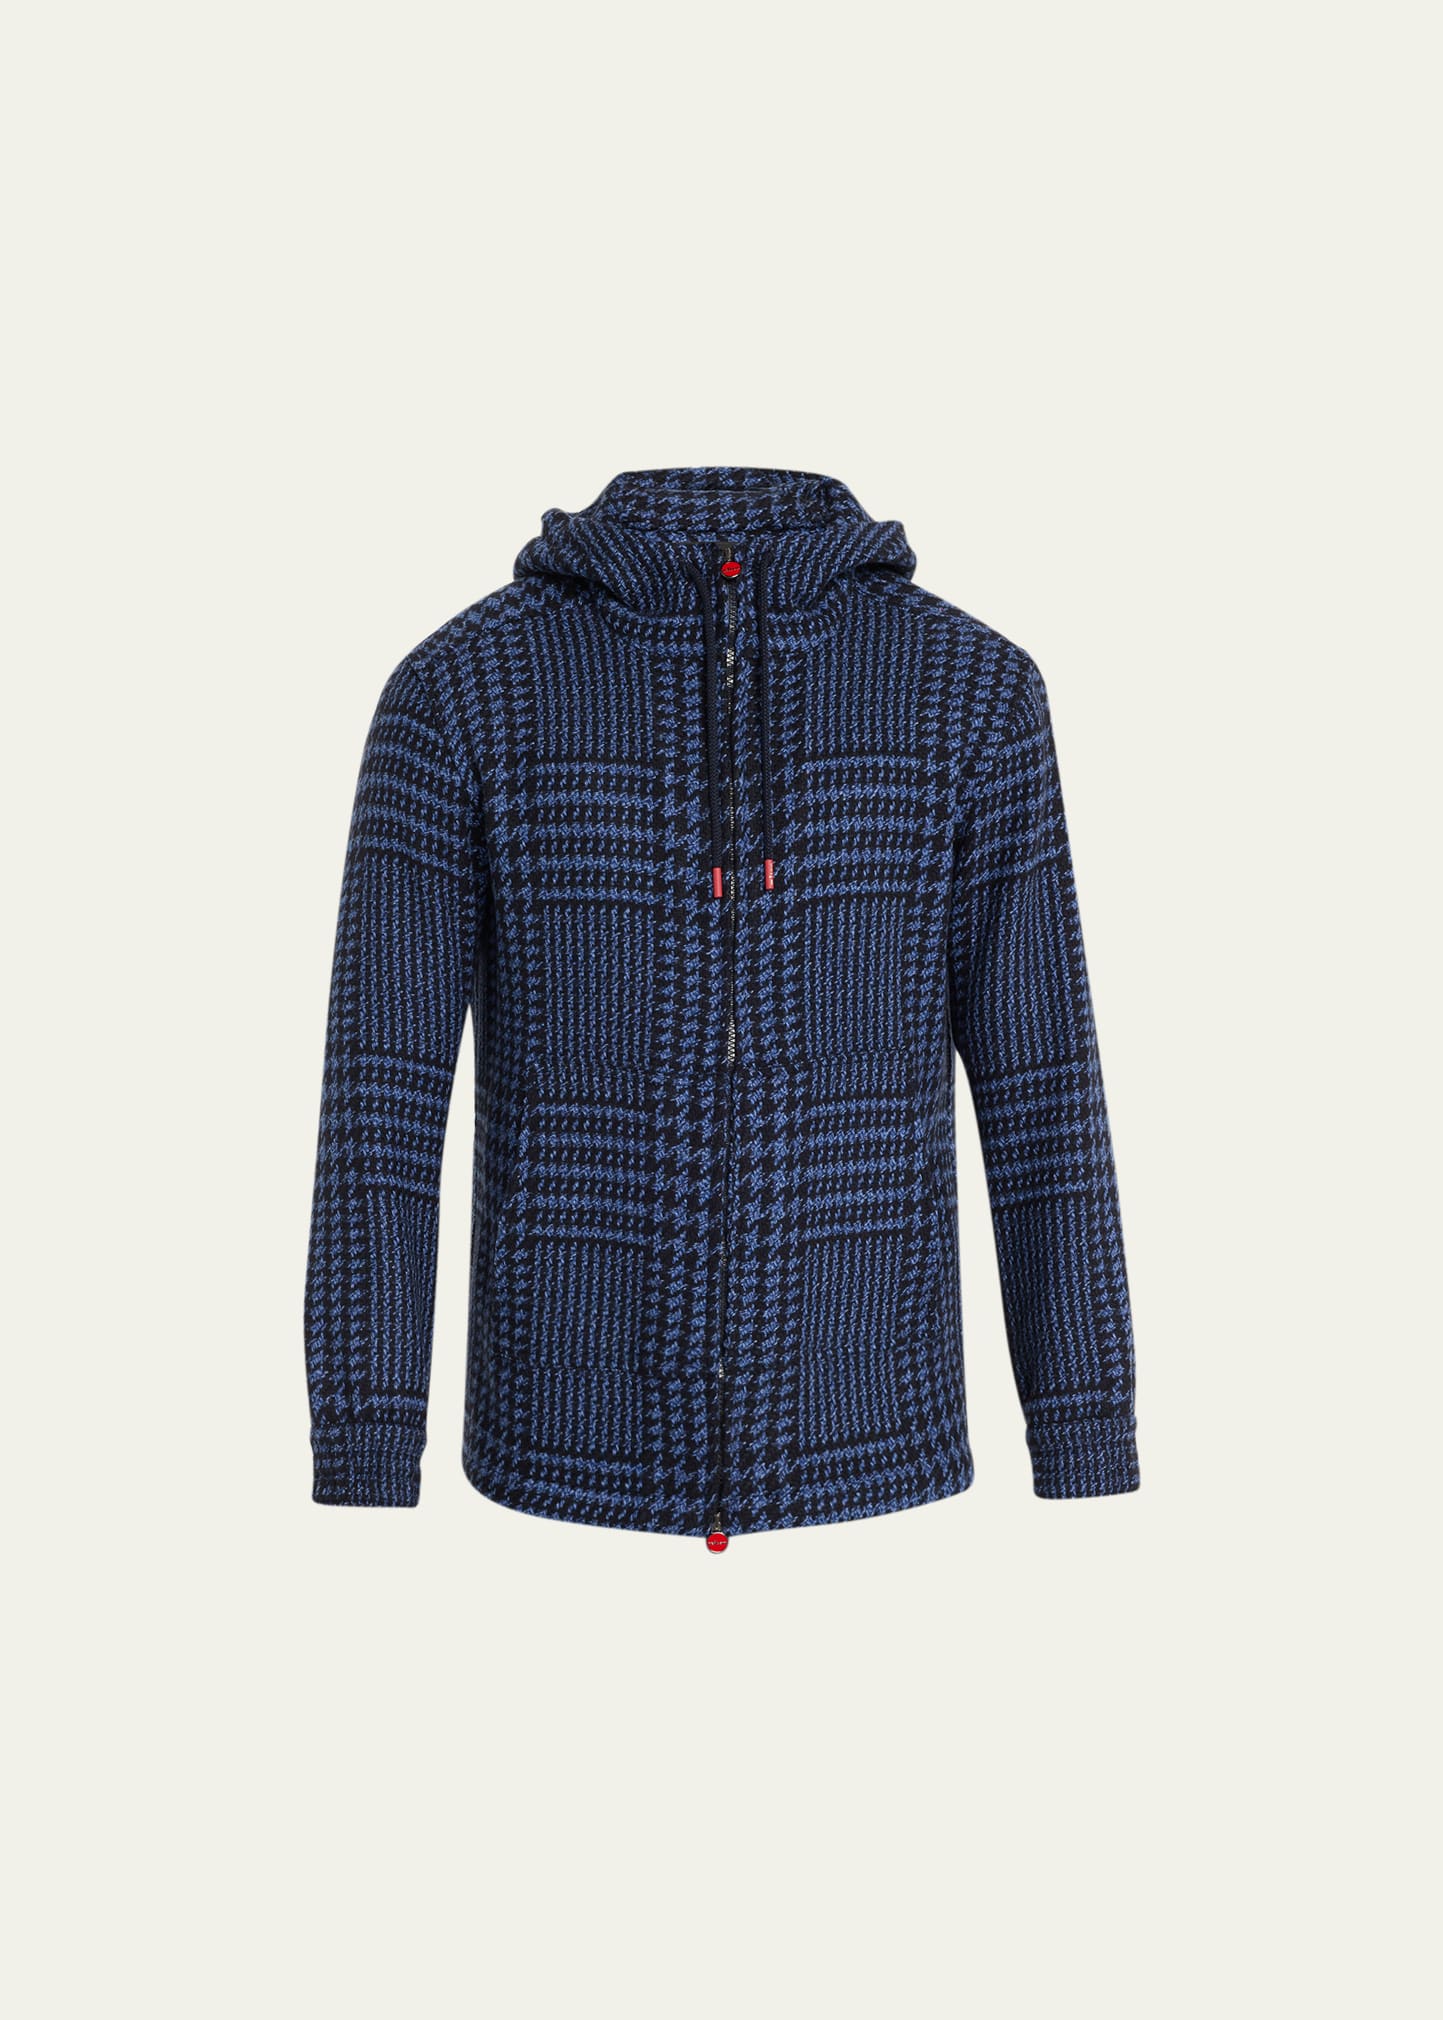 Men's Cashmere Plaid Hooded Full-Zip Sweater